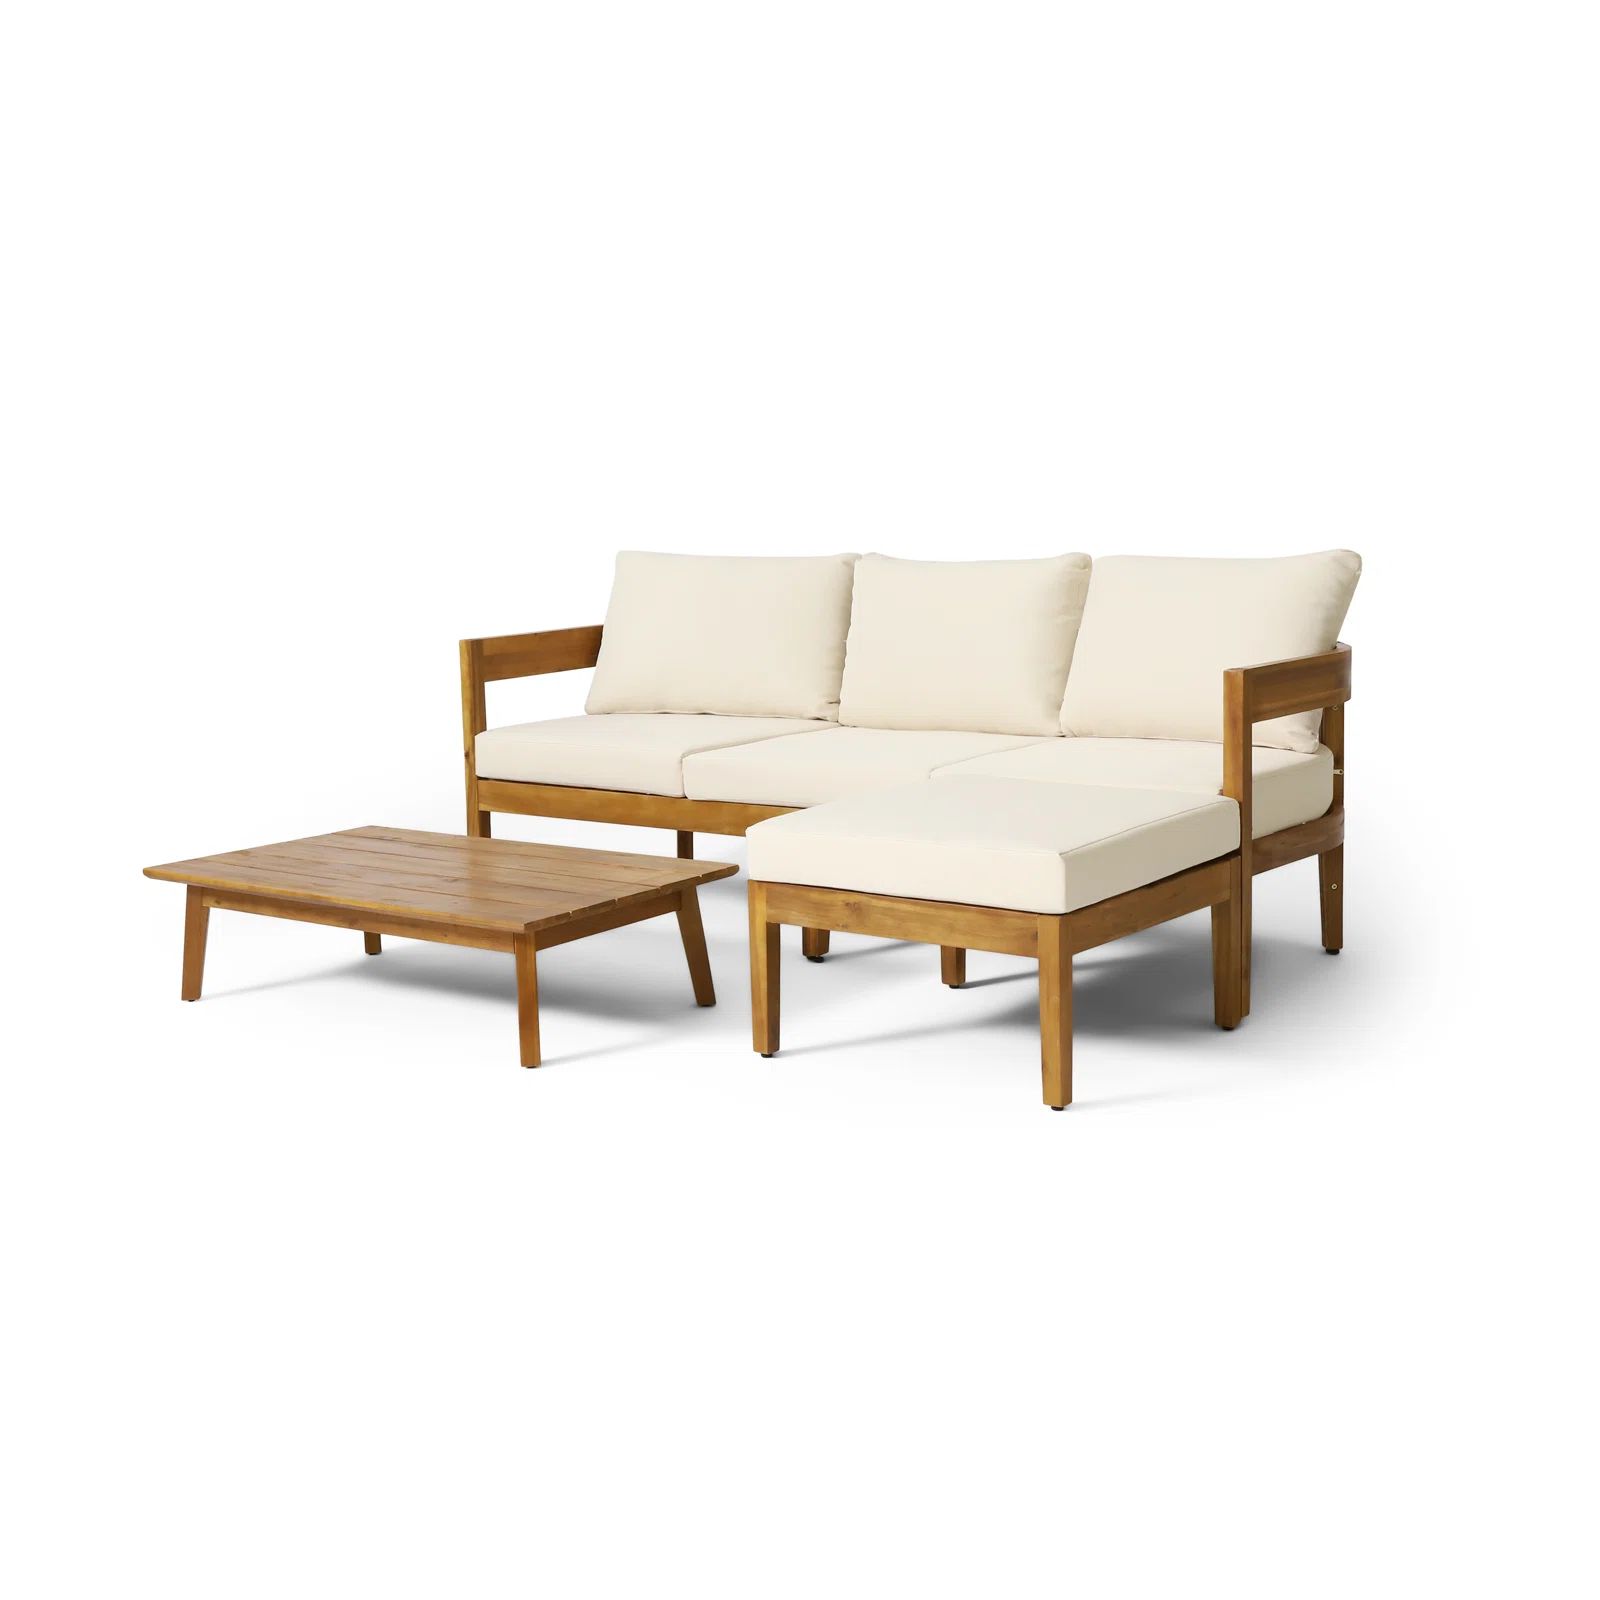 Deamonte 3 - Person Outdoor Seating Group with Cushions | Wayfair North America